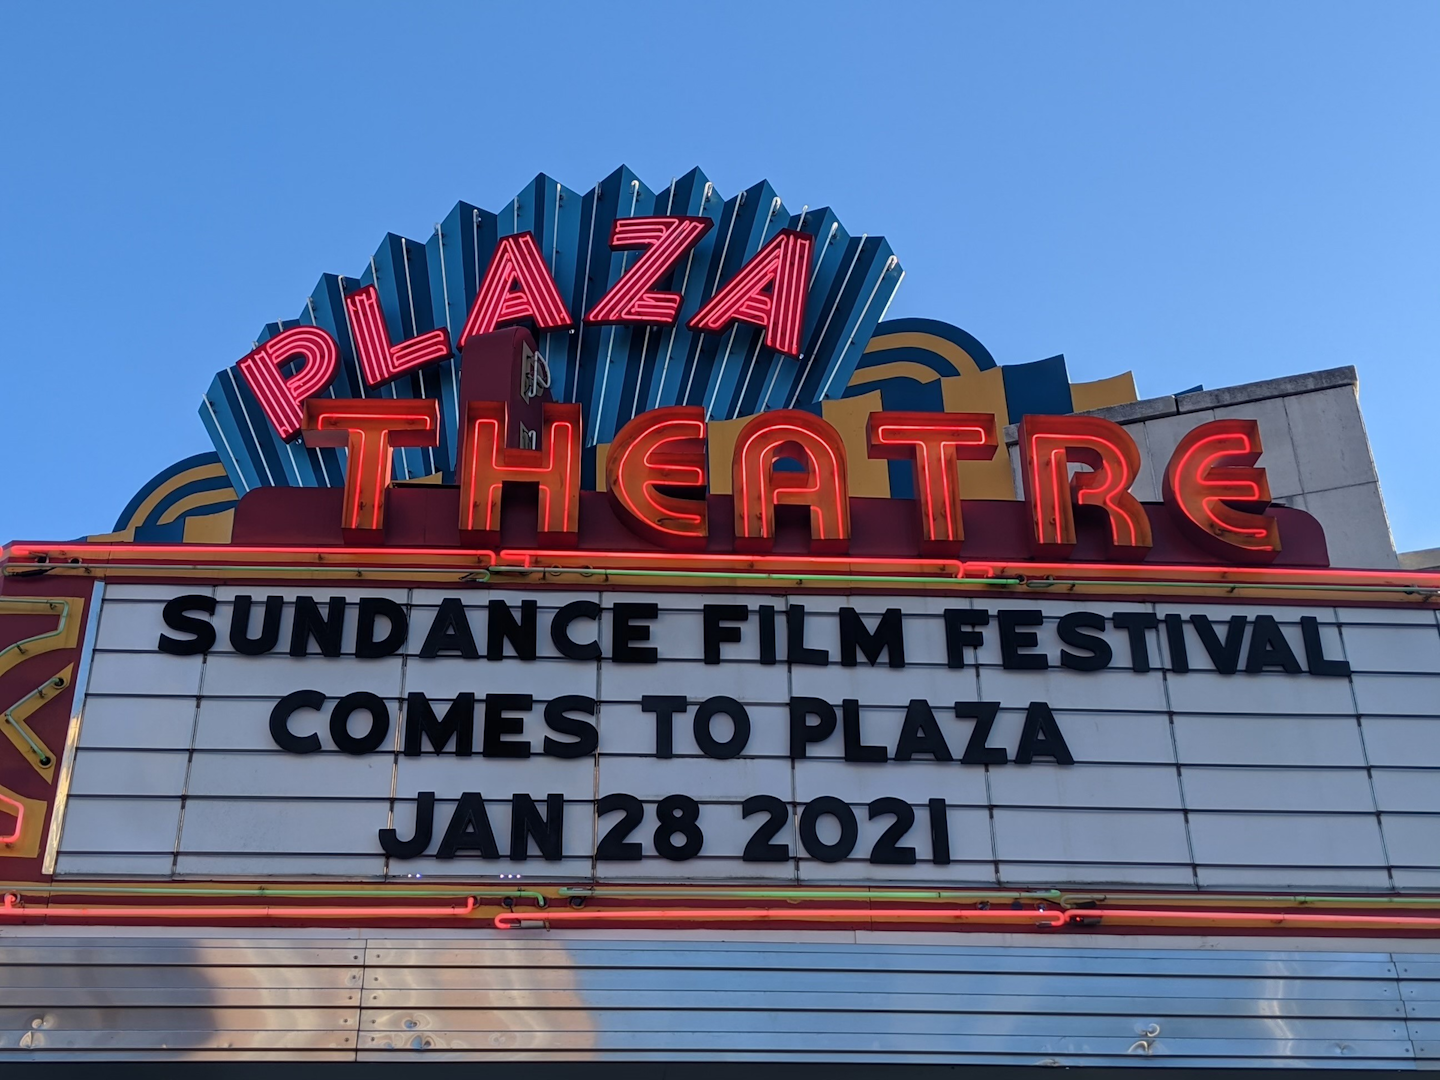 As part of the Satellite Screens initiative, the Atlanta Film Society and the Plaza Theatre presented 12 films including the much-buzzed-about Coda.